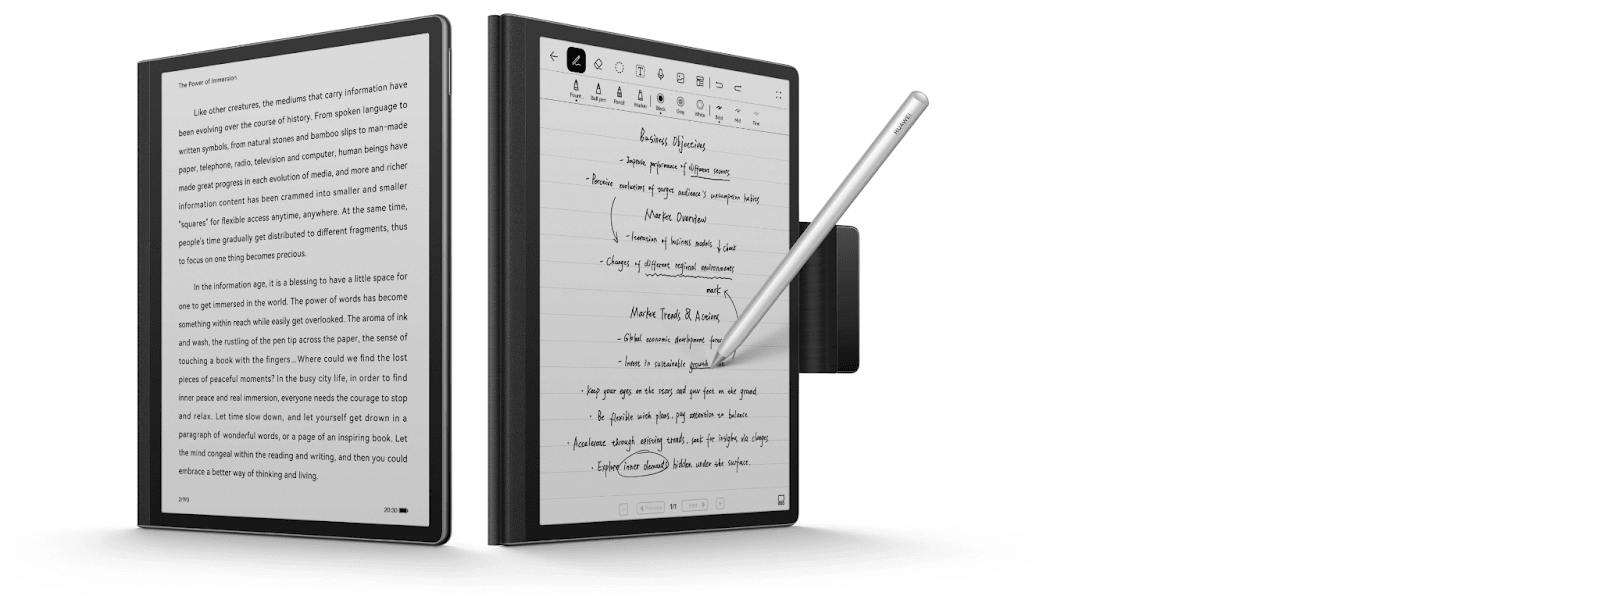  Remarkable 2 Bundle - Remarkable 2 Tablet (10.3” Digital Paper  Display), Marker Plus Pen with Eraser, Book Folio Black Leather Folio  Cover, and 1-Year Free Connect Trial : Electronics